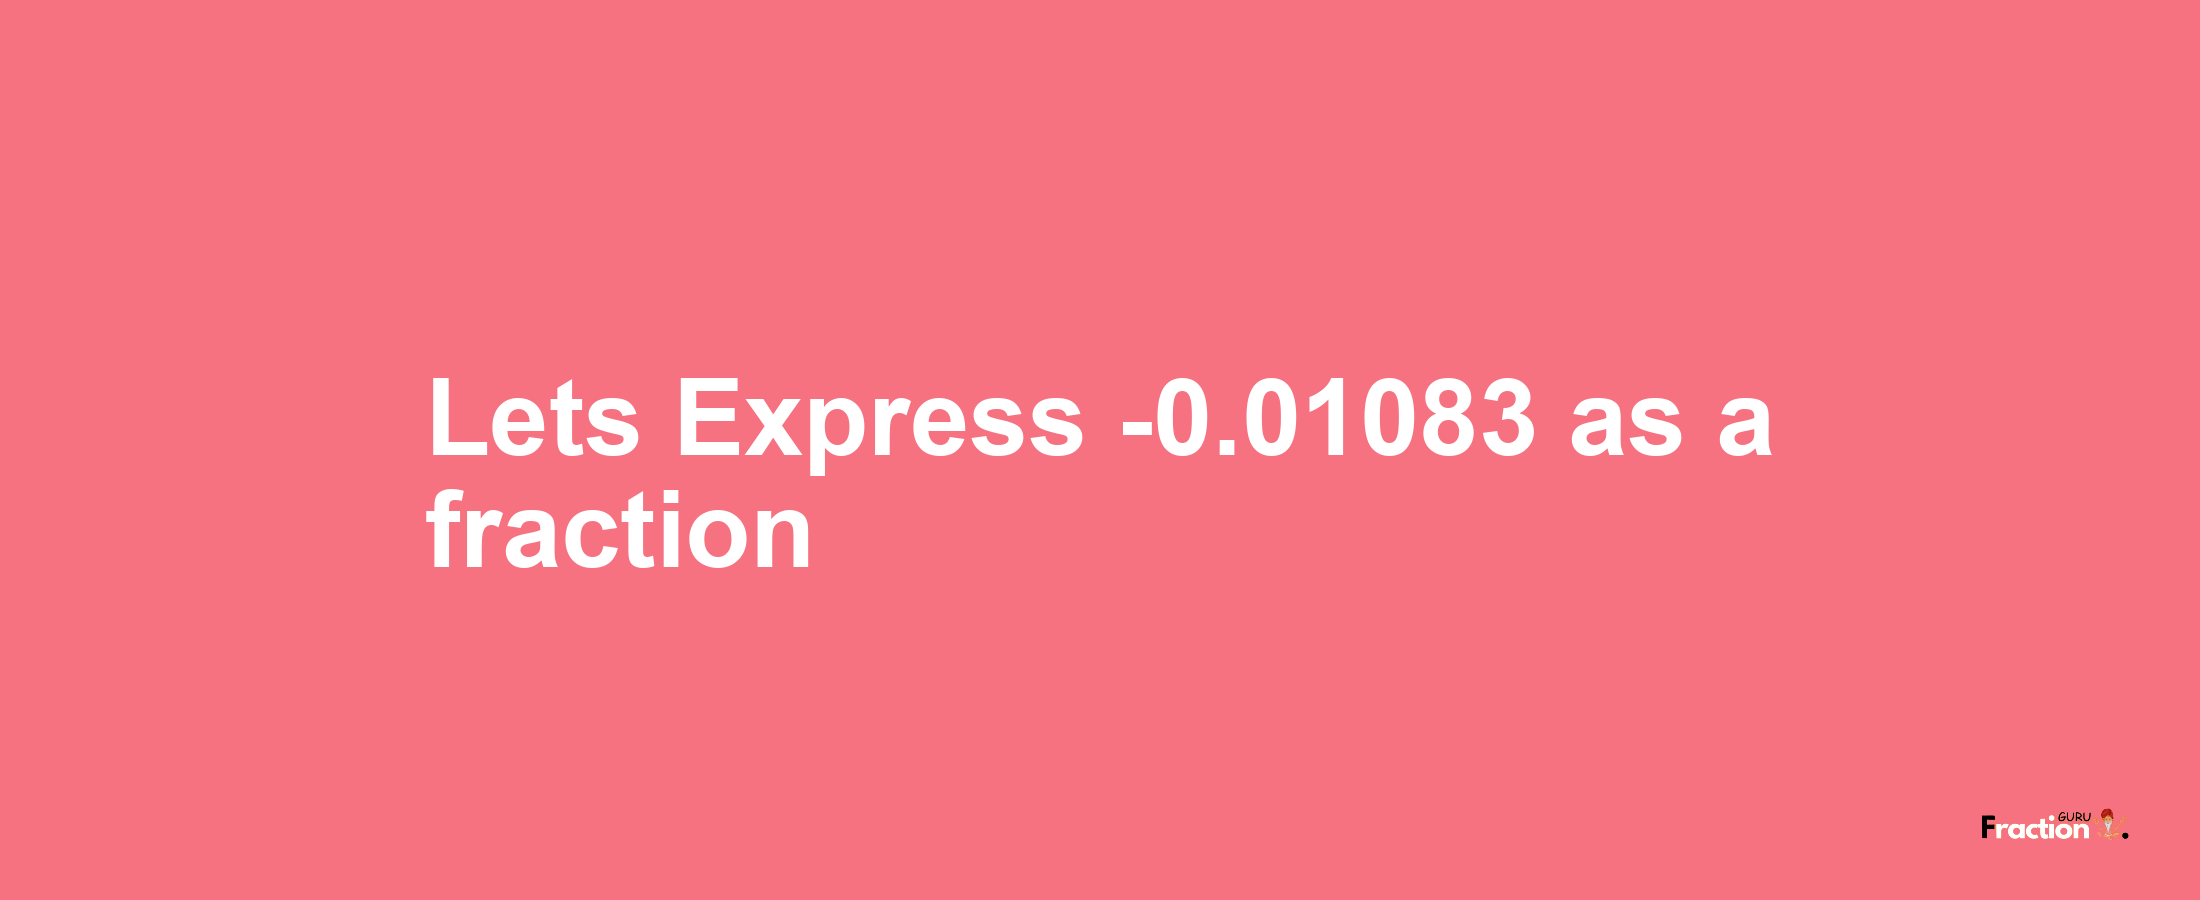 Lets Express -0.01083 as afraction